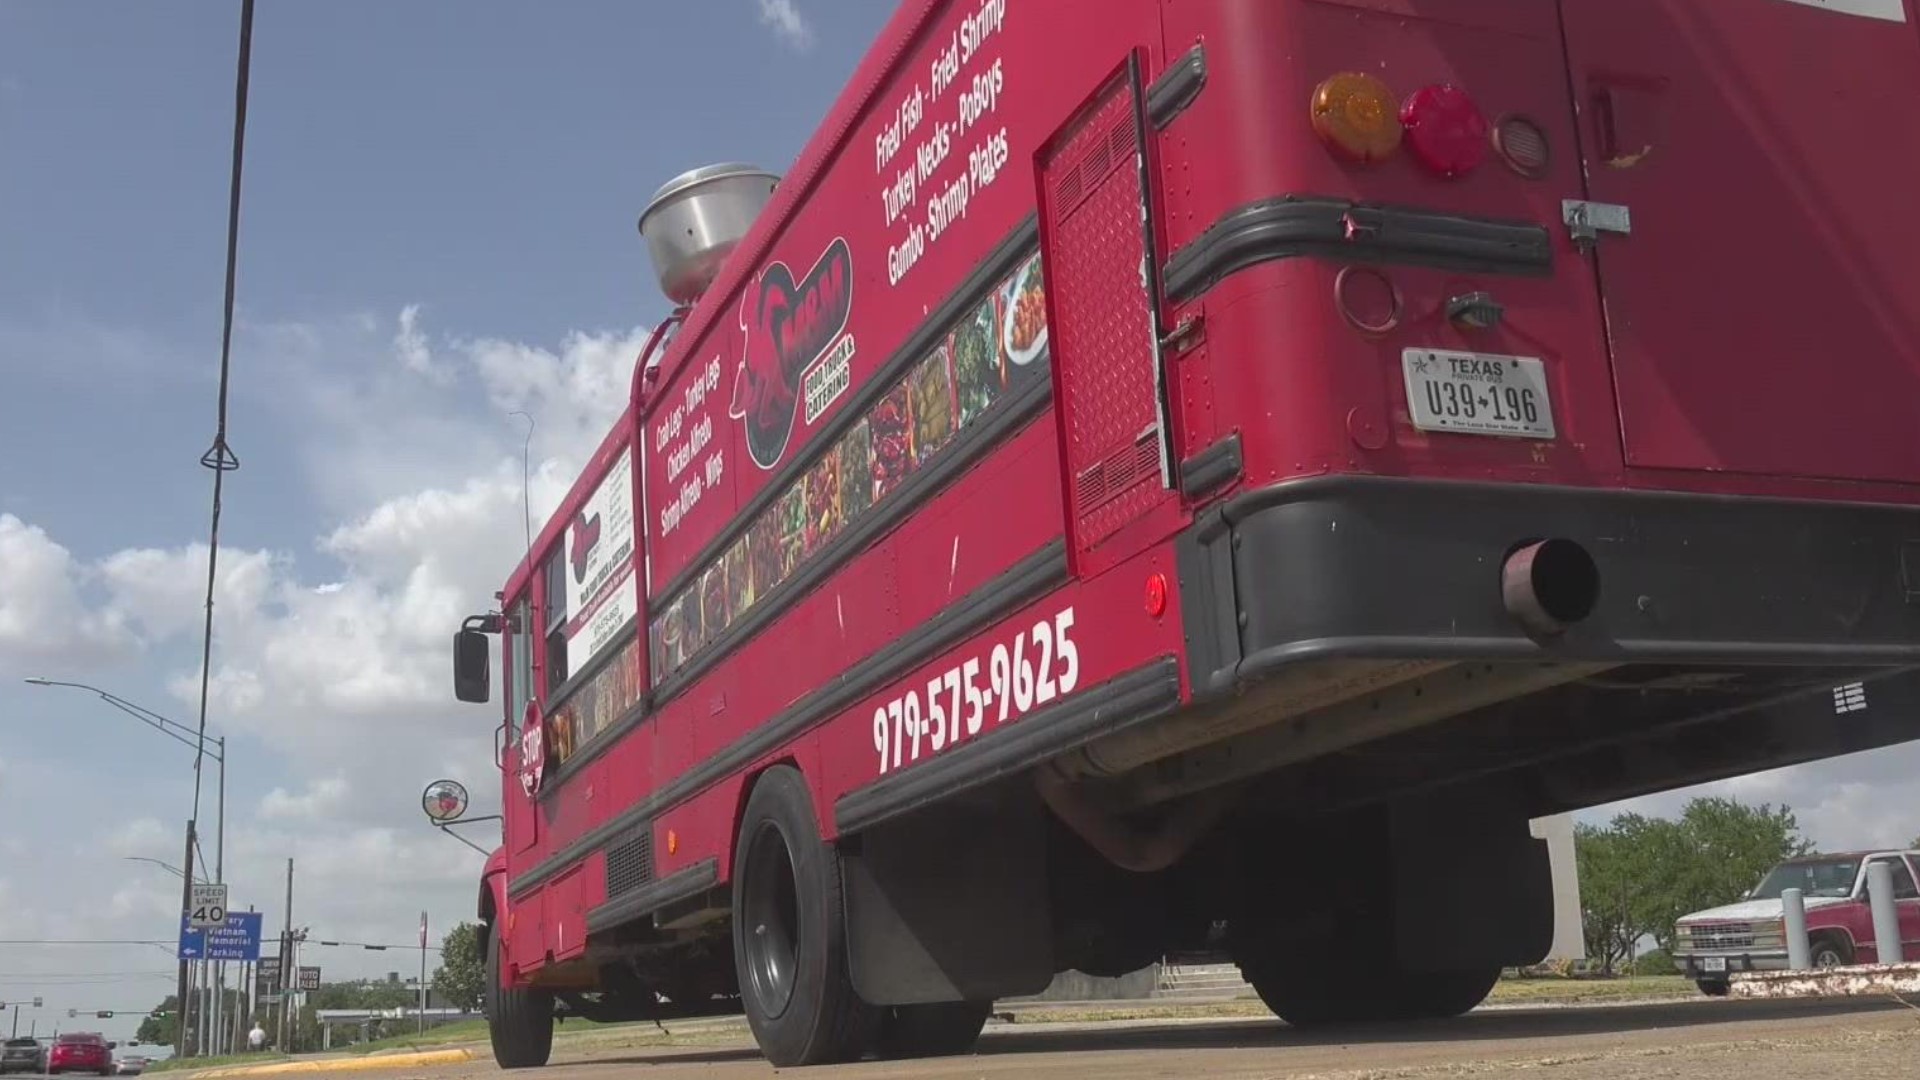 Food trucks in the area share how they are taking extra measures to preserve their food and businesses.